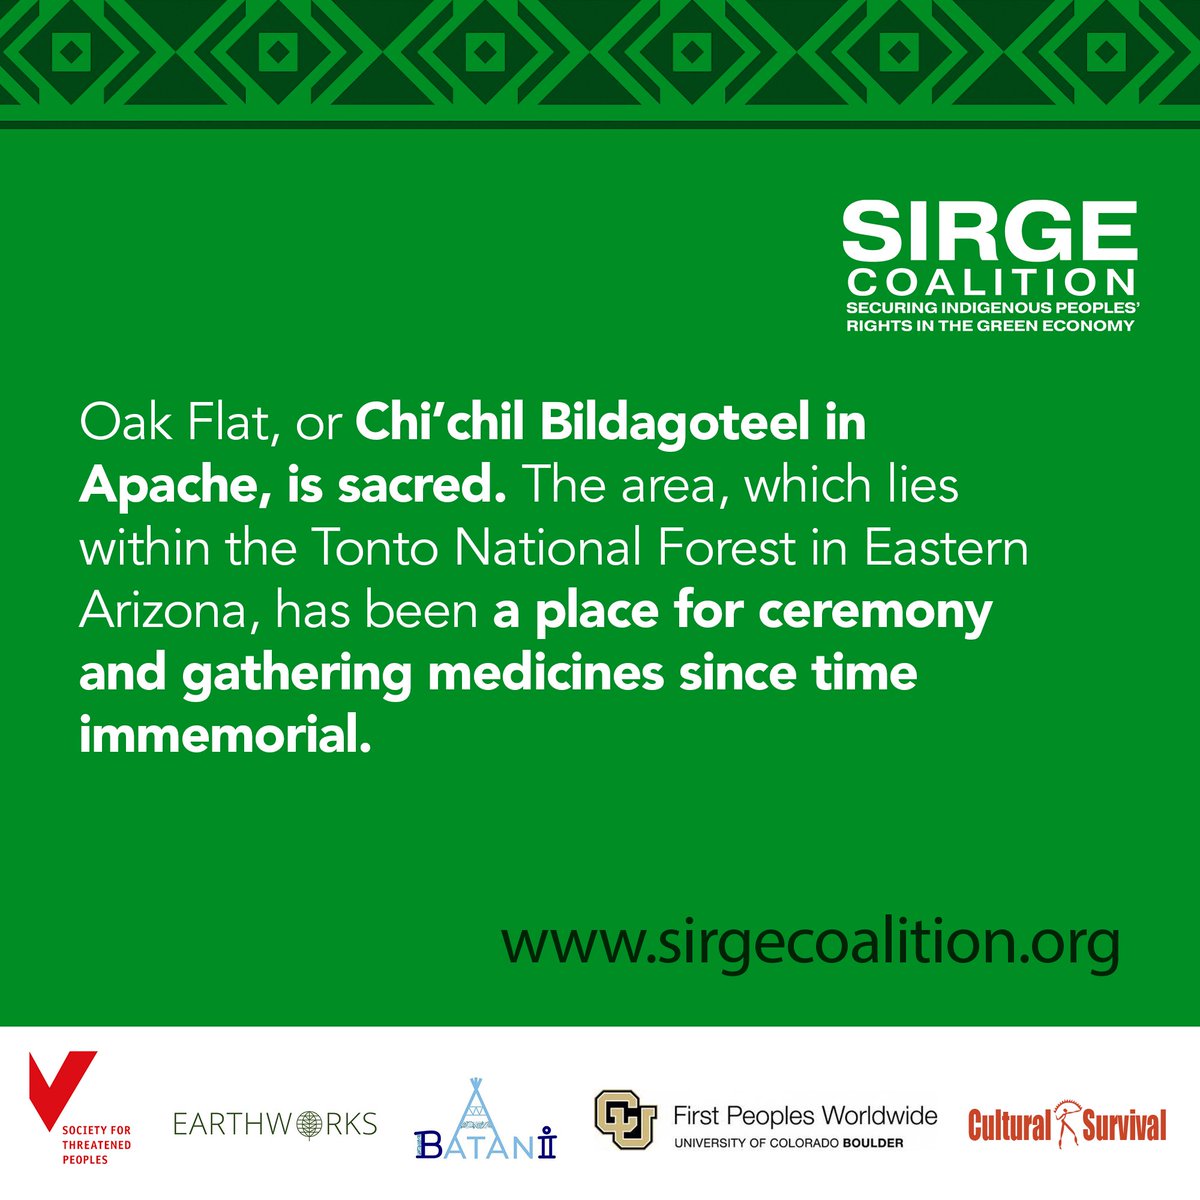 The Securing Indigenous Peoples Rights in the Green Economy (#SIRGE) Coalition stands with the #ApacheStronghold in demanding that Free, Prior and Informed Consent (#FPIC) is honored. #DefendTheDefenders #JustTransition #ProtectOakFlat #saveoakflat sirgecoalition.org/statements/sir… 1/2